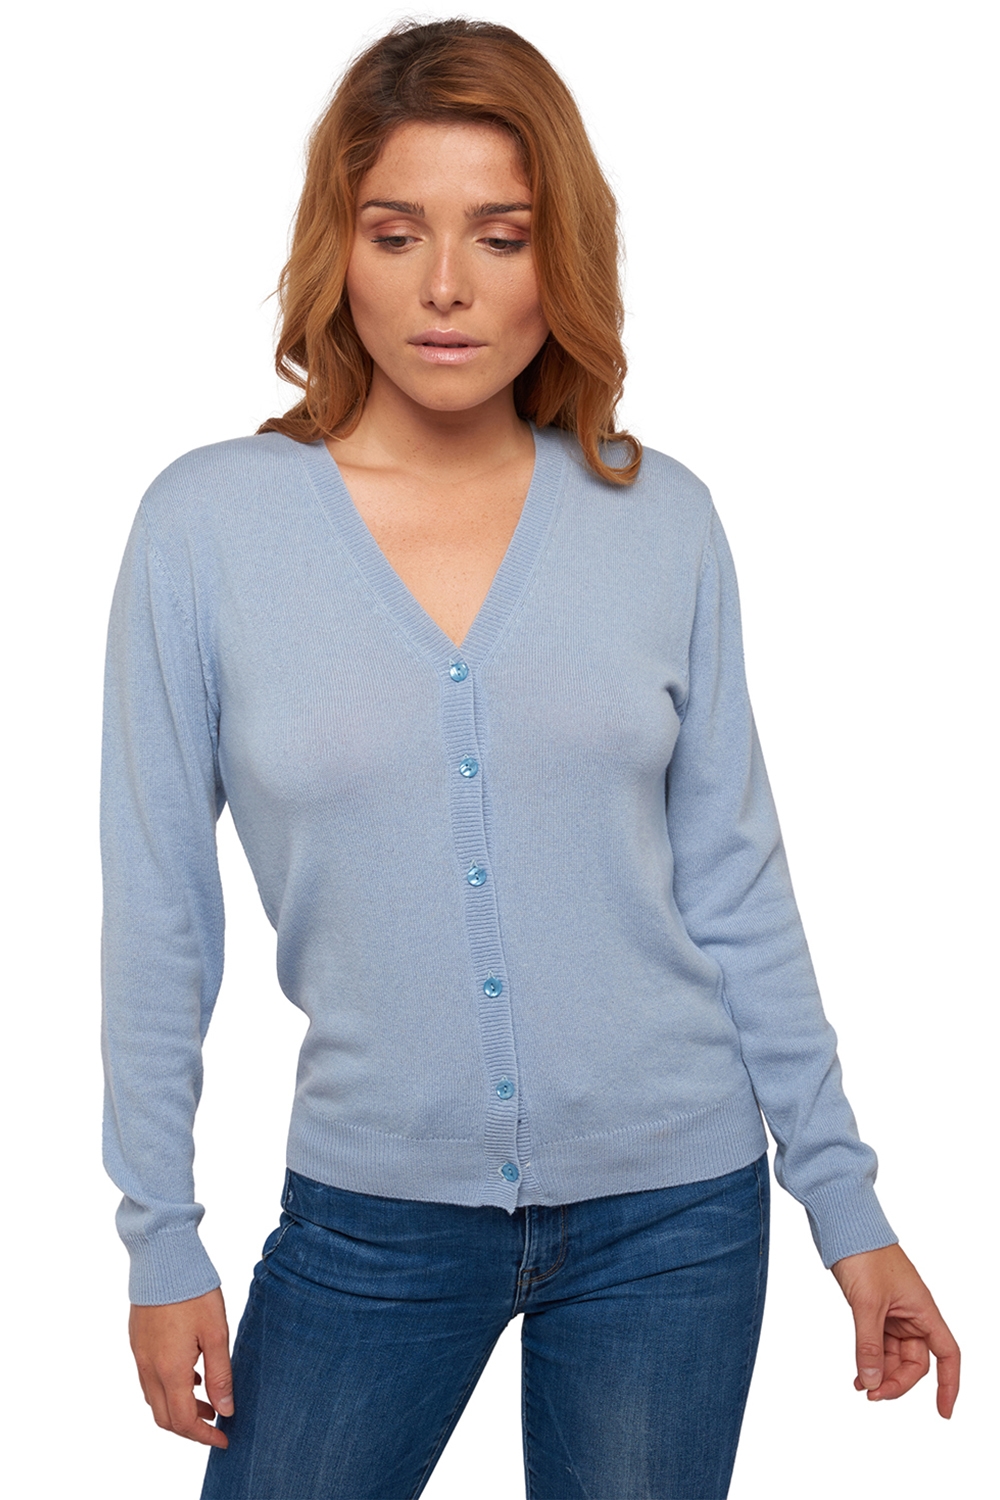 Cashmere ladies basic sweaters at low prices taline sky blue m